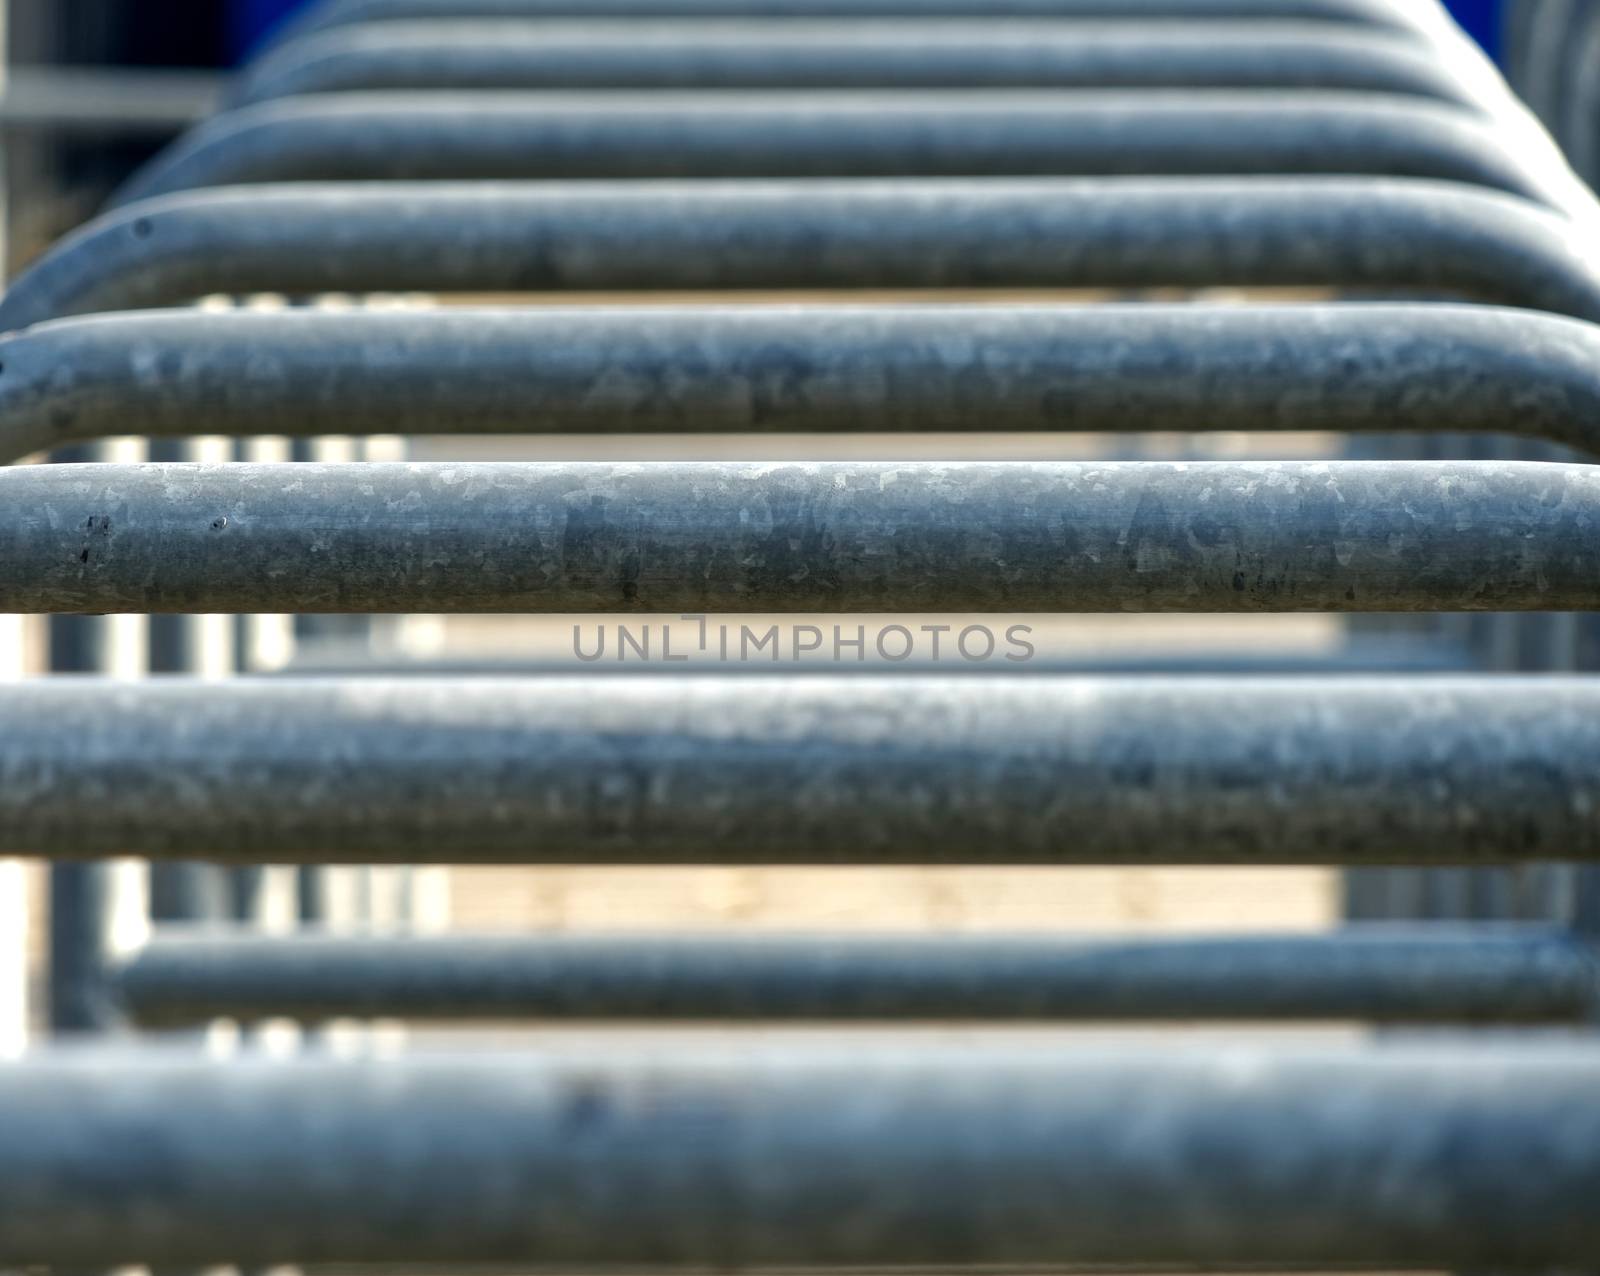 Abstract image with low depth of field (DOF) from the rows of entrances to an arena separated by metal brackets, germany